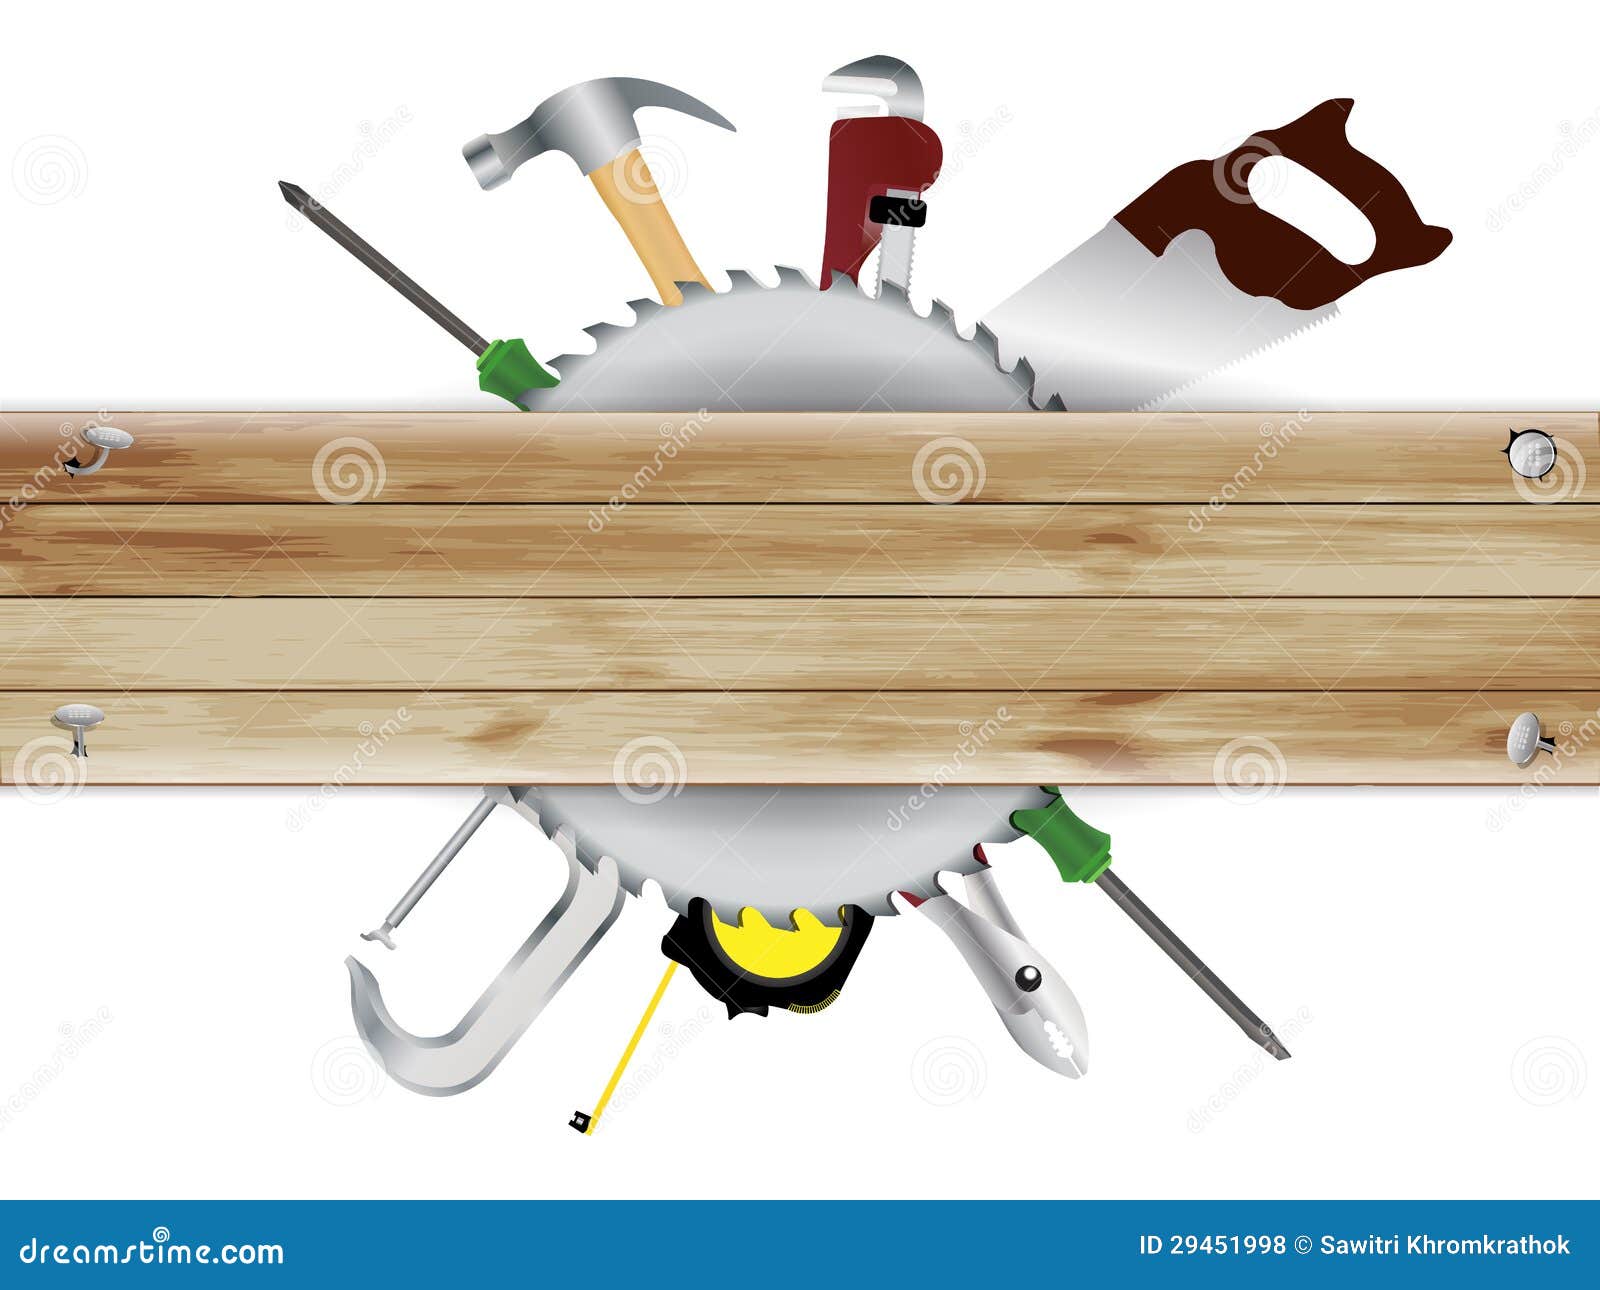 woodworking tools clip art free - photo #12